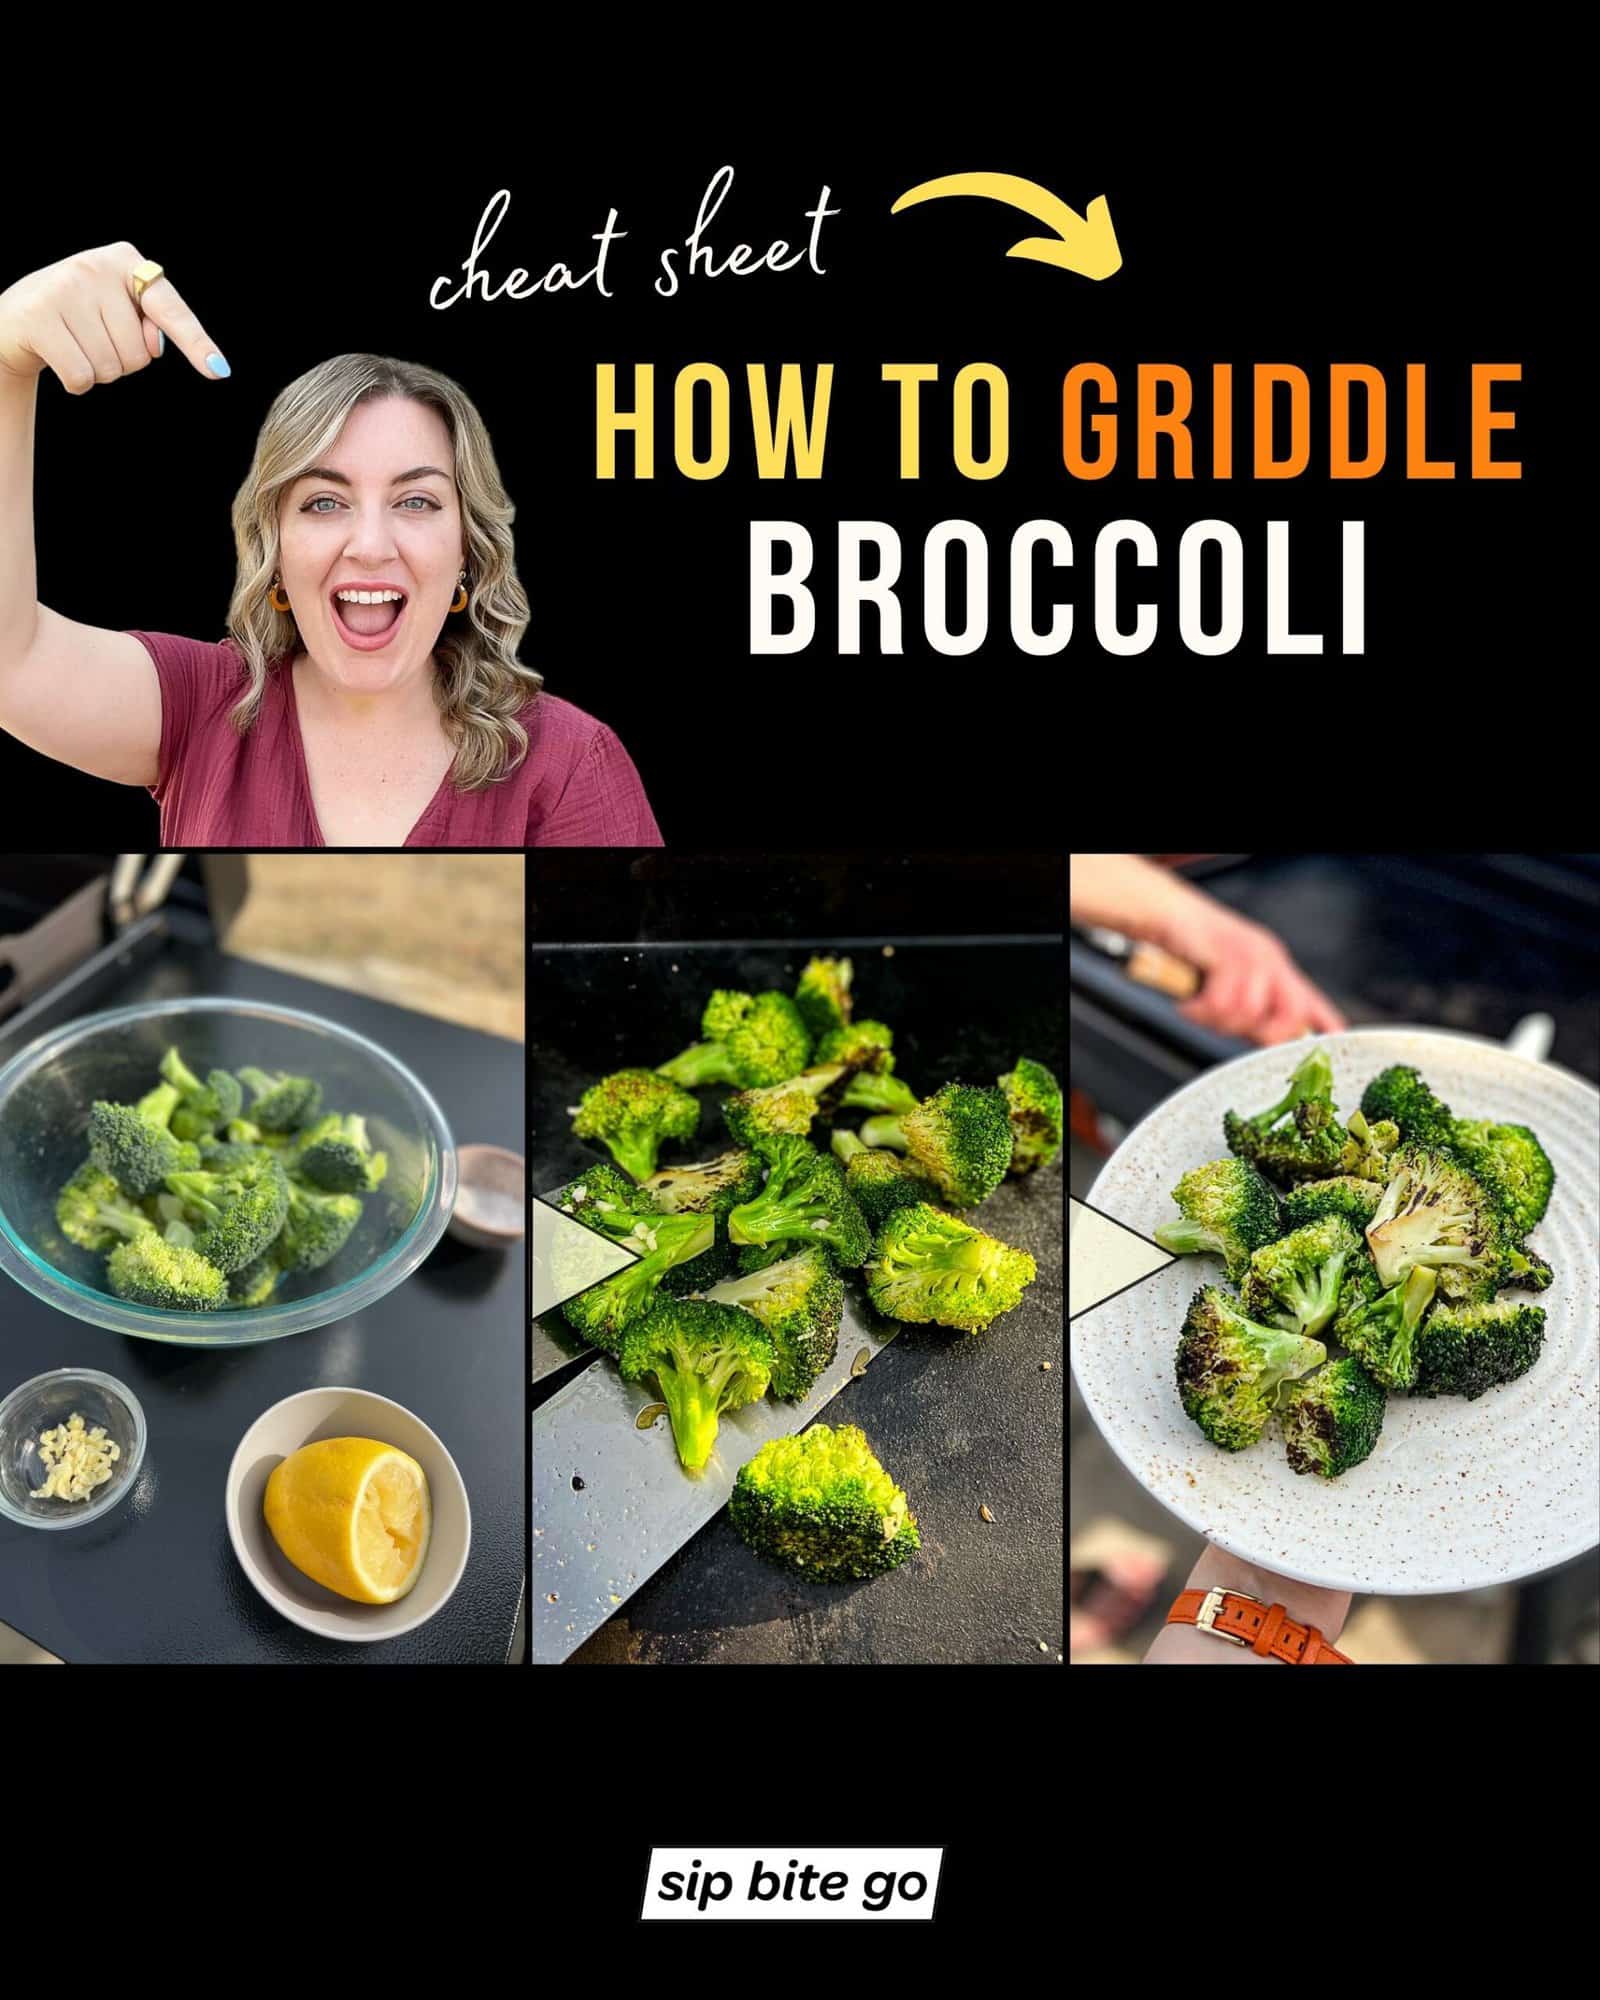 Infographic with step by step recipe images for cooking griddled broccoli with Jenna Passaro and Sip Bite Go logo